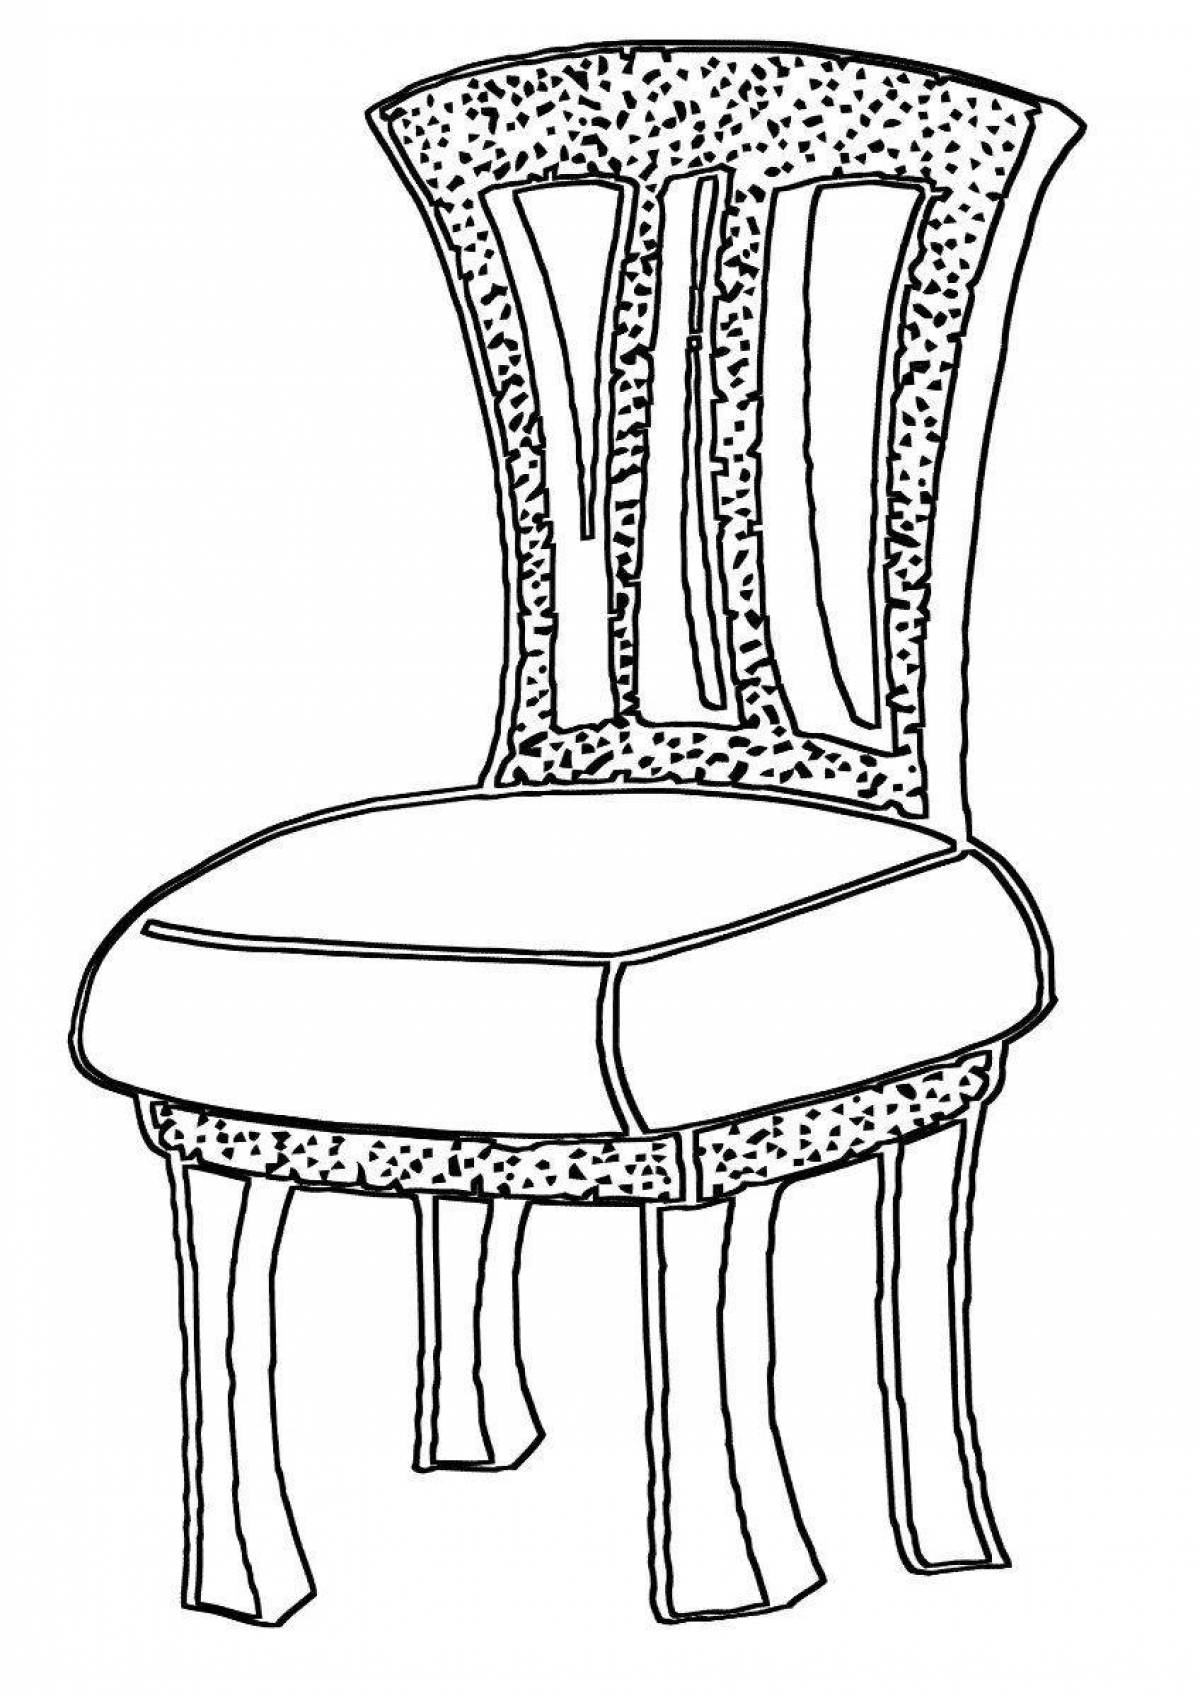 Colouring bright furniture for dolls